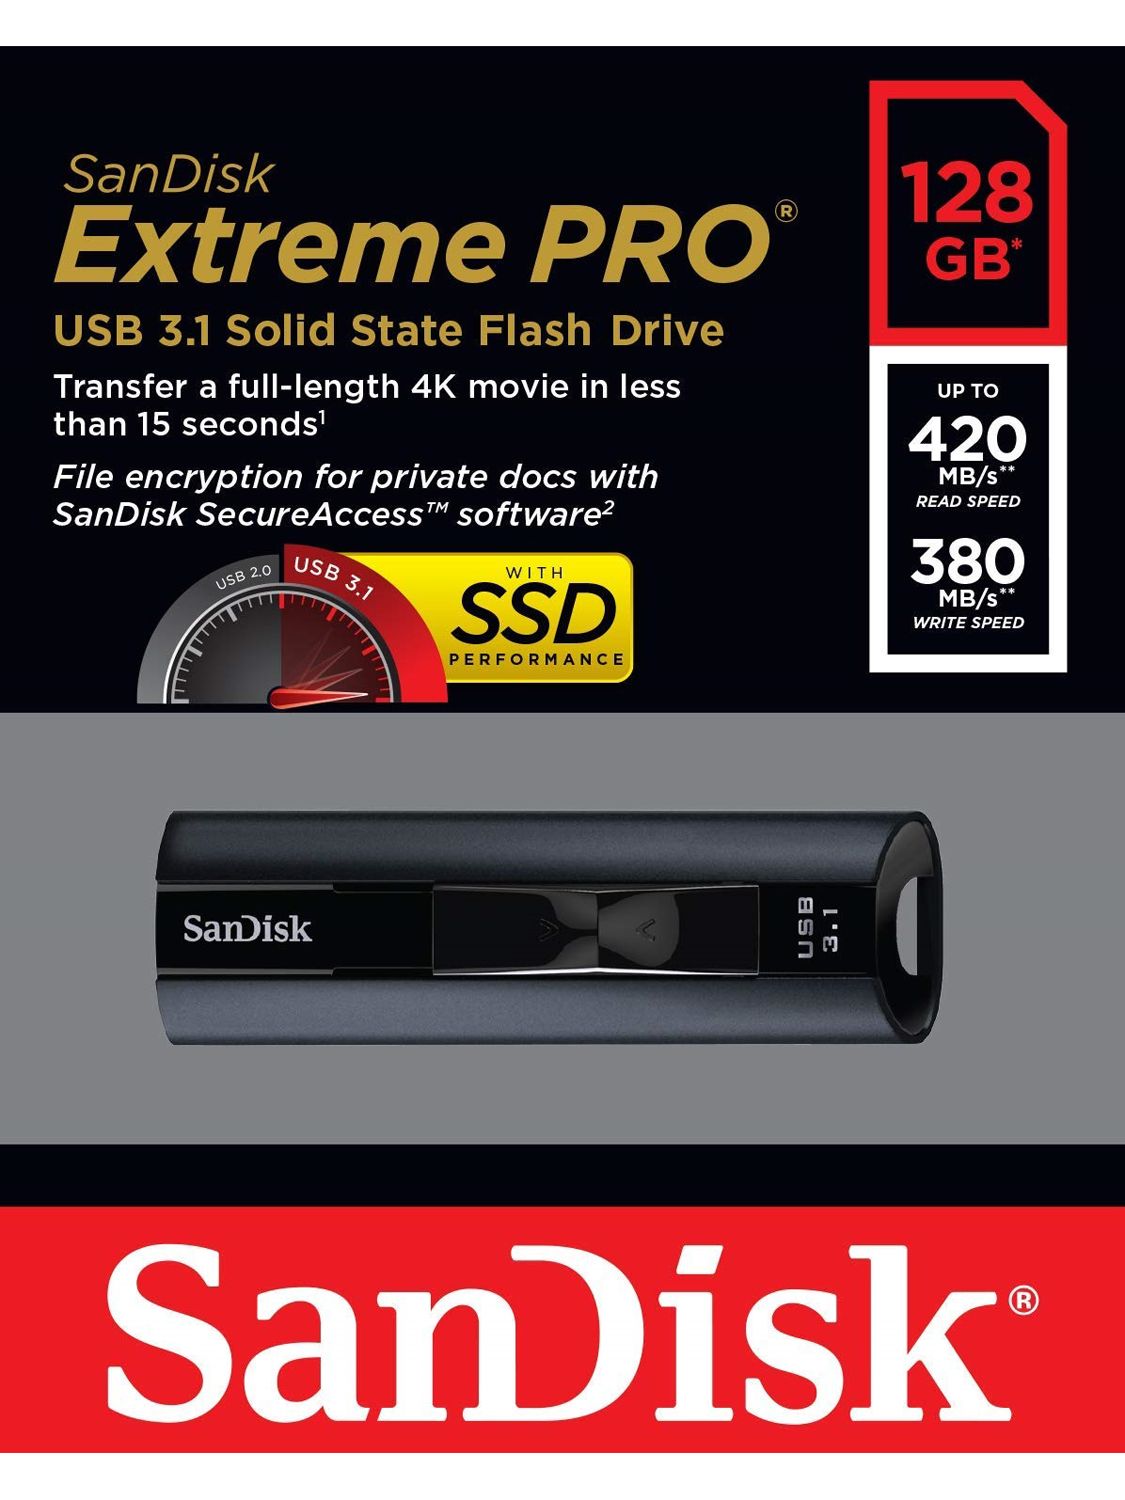 SanDisk Extreme Pro 128GB USB 3.0 Flash Drive Review